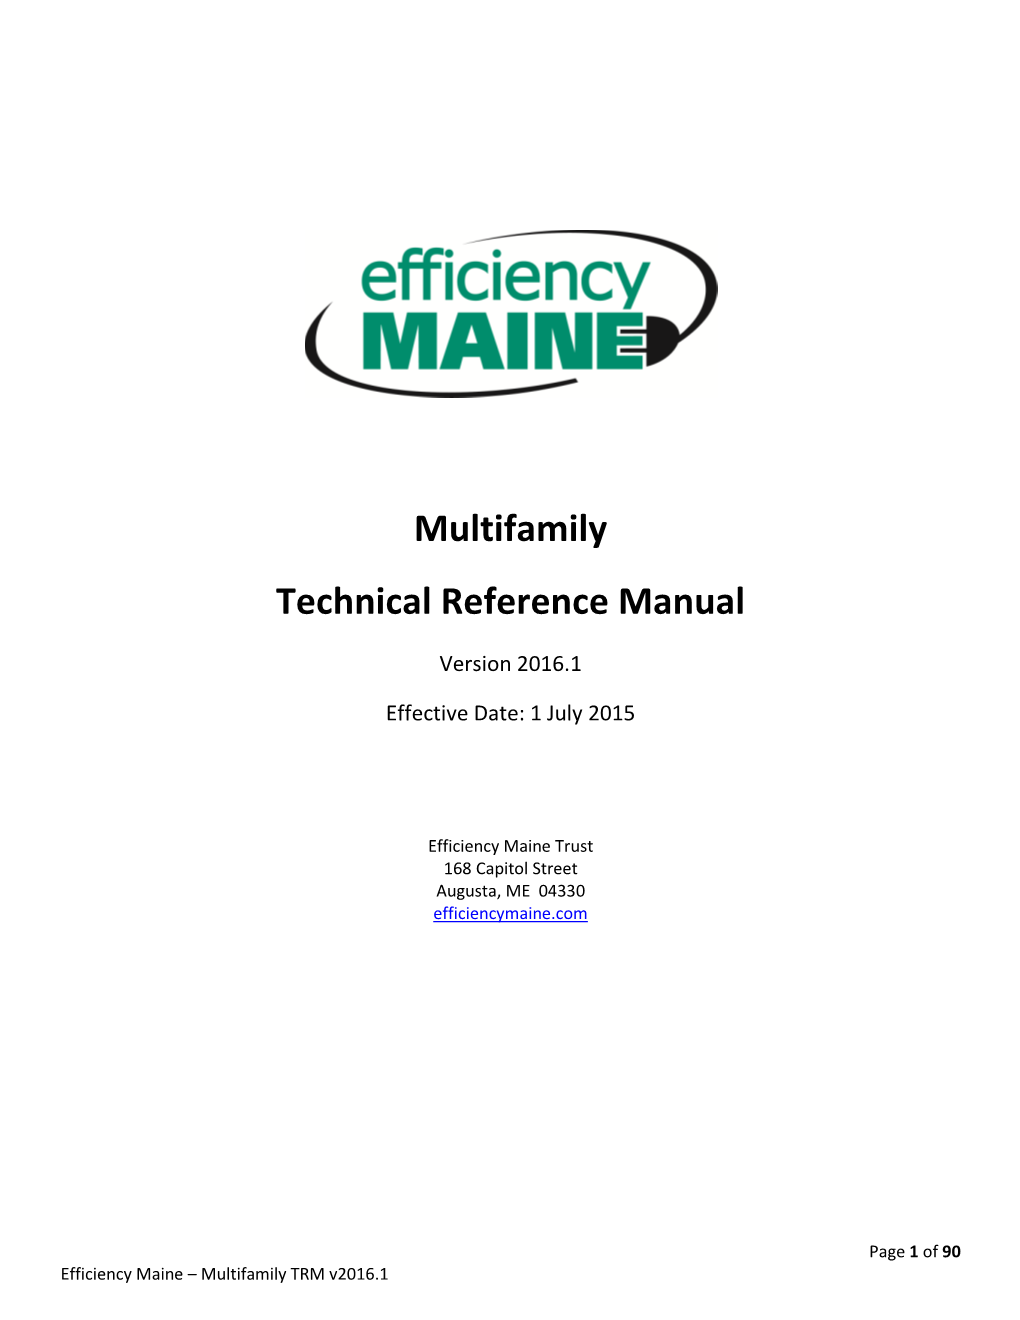 Efficiency Maine Multifamily Technical Reference Manual